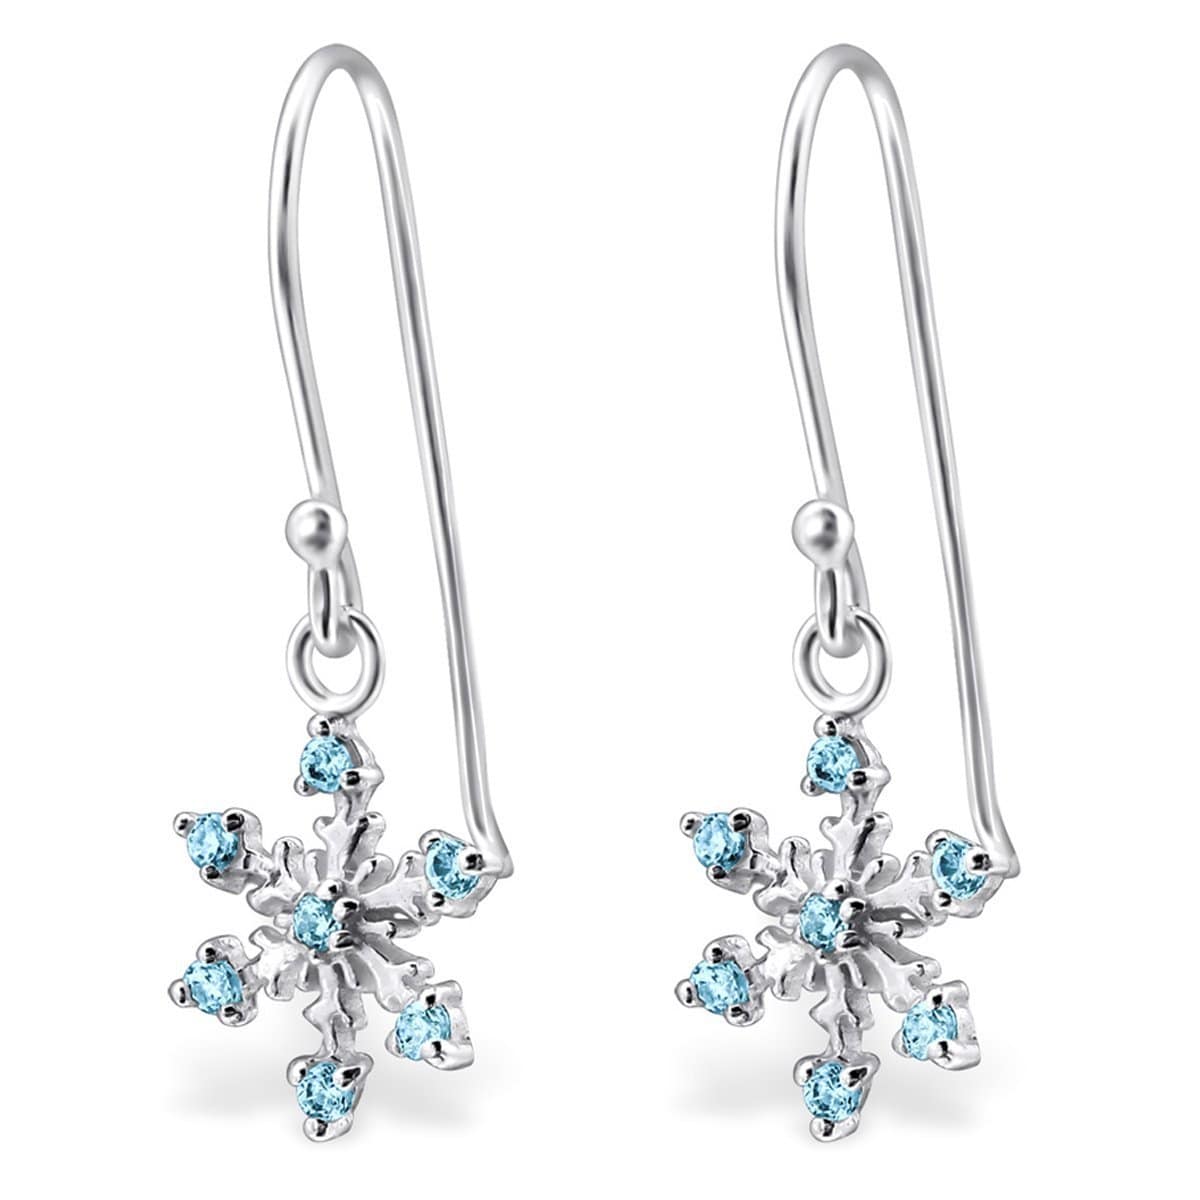 Sterling Siver Snowflake Hanging earrings with CZ Aqua